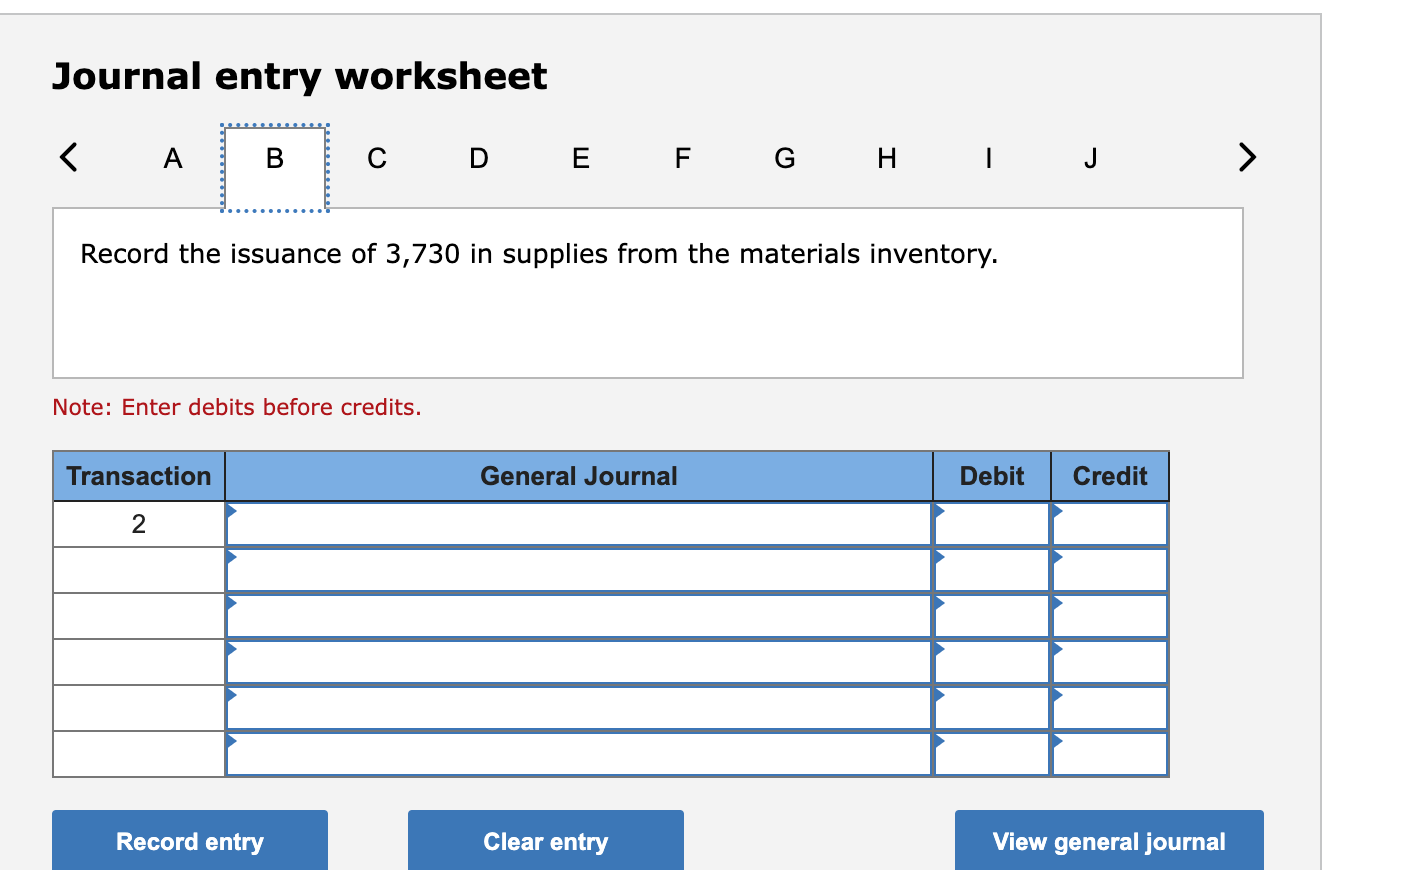 Journal entry worksheet < A B Transaction 2 C Record the issuance of 3,730 in supplies from the materials